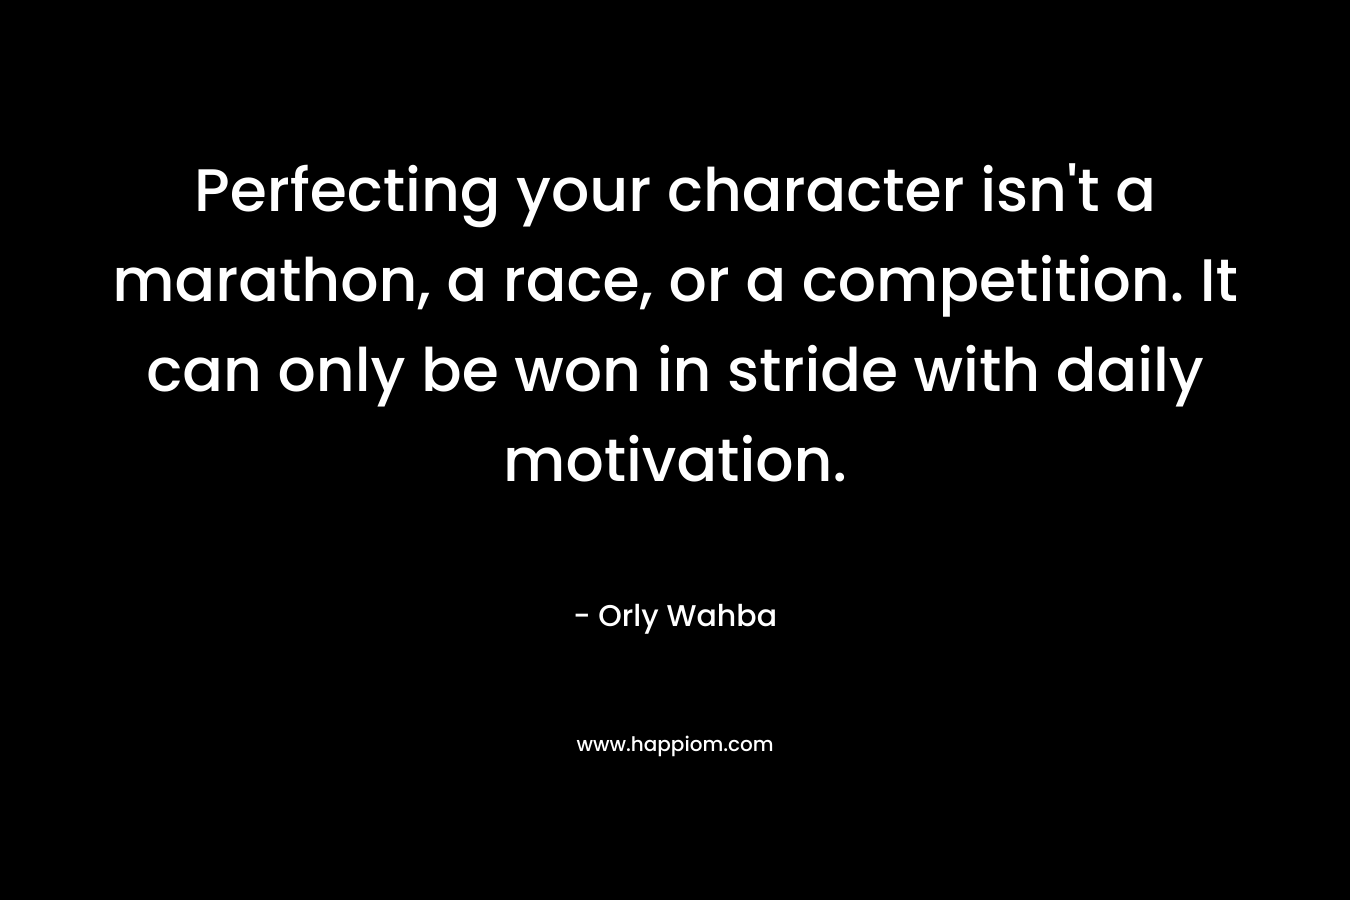 Perfecting your character isn’t a marathon, a race, or a competition. It can only be won in stride with daily motivation. – Orly Wahba